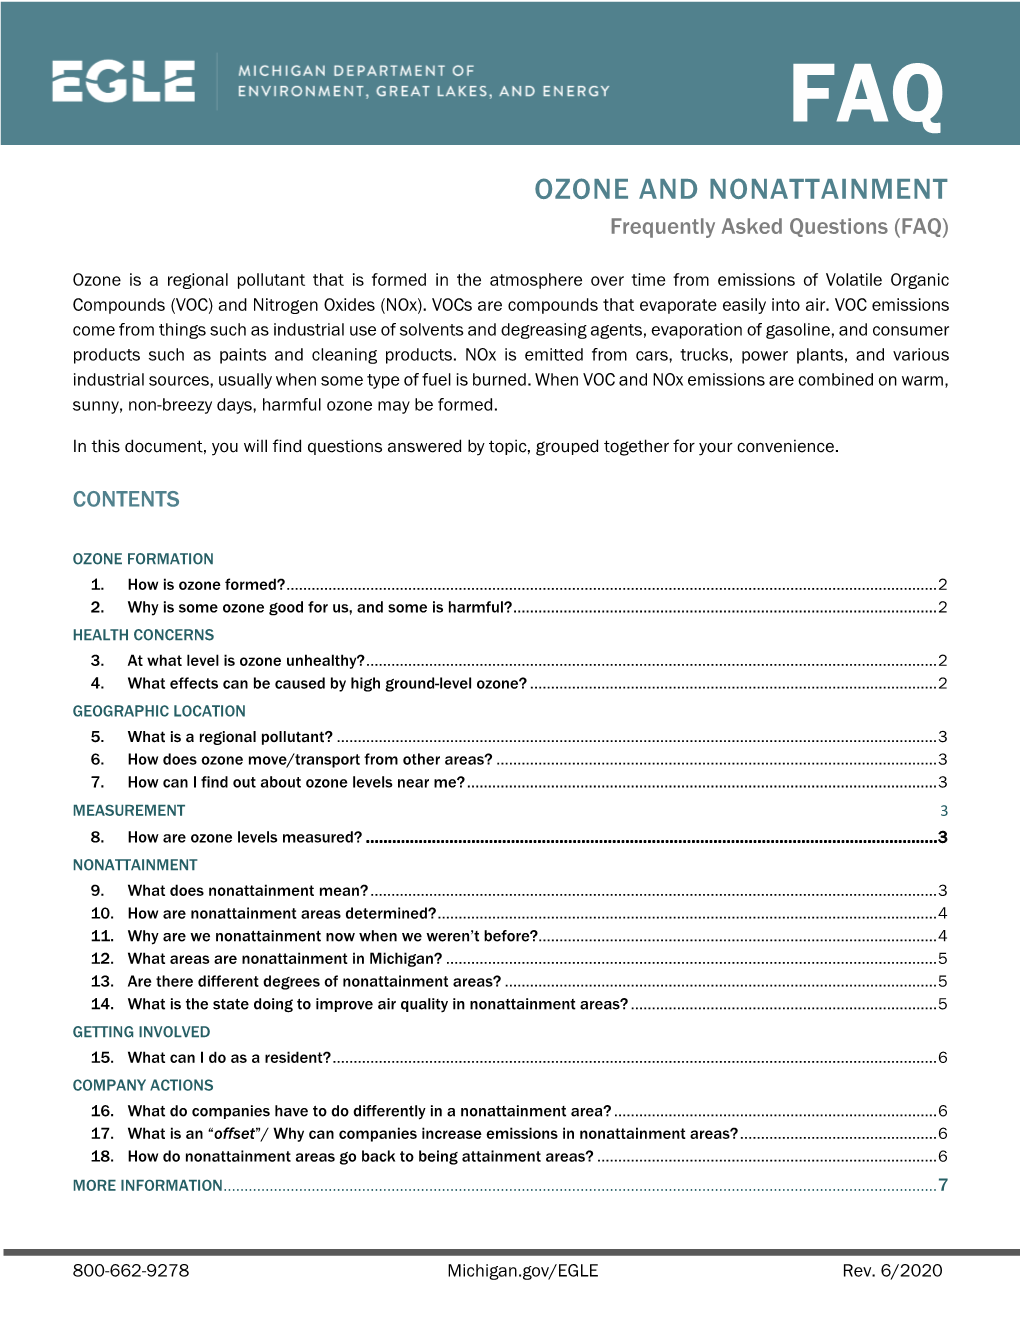 OZONE and NONATTAINMENT Frequently Asked Questions (FAQ)